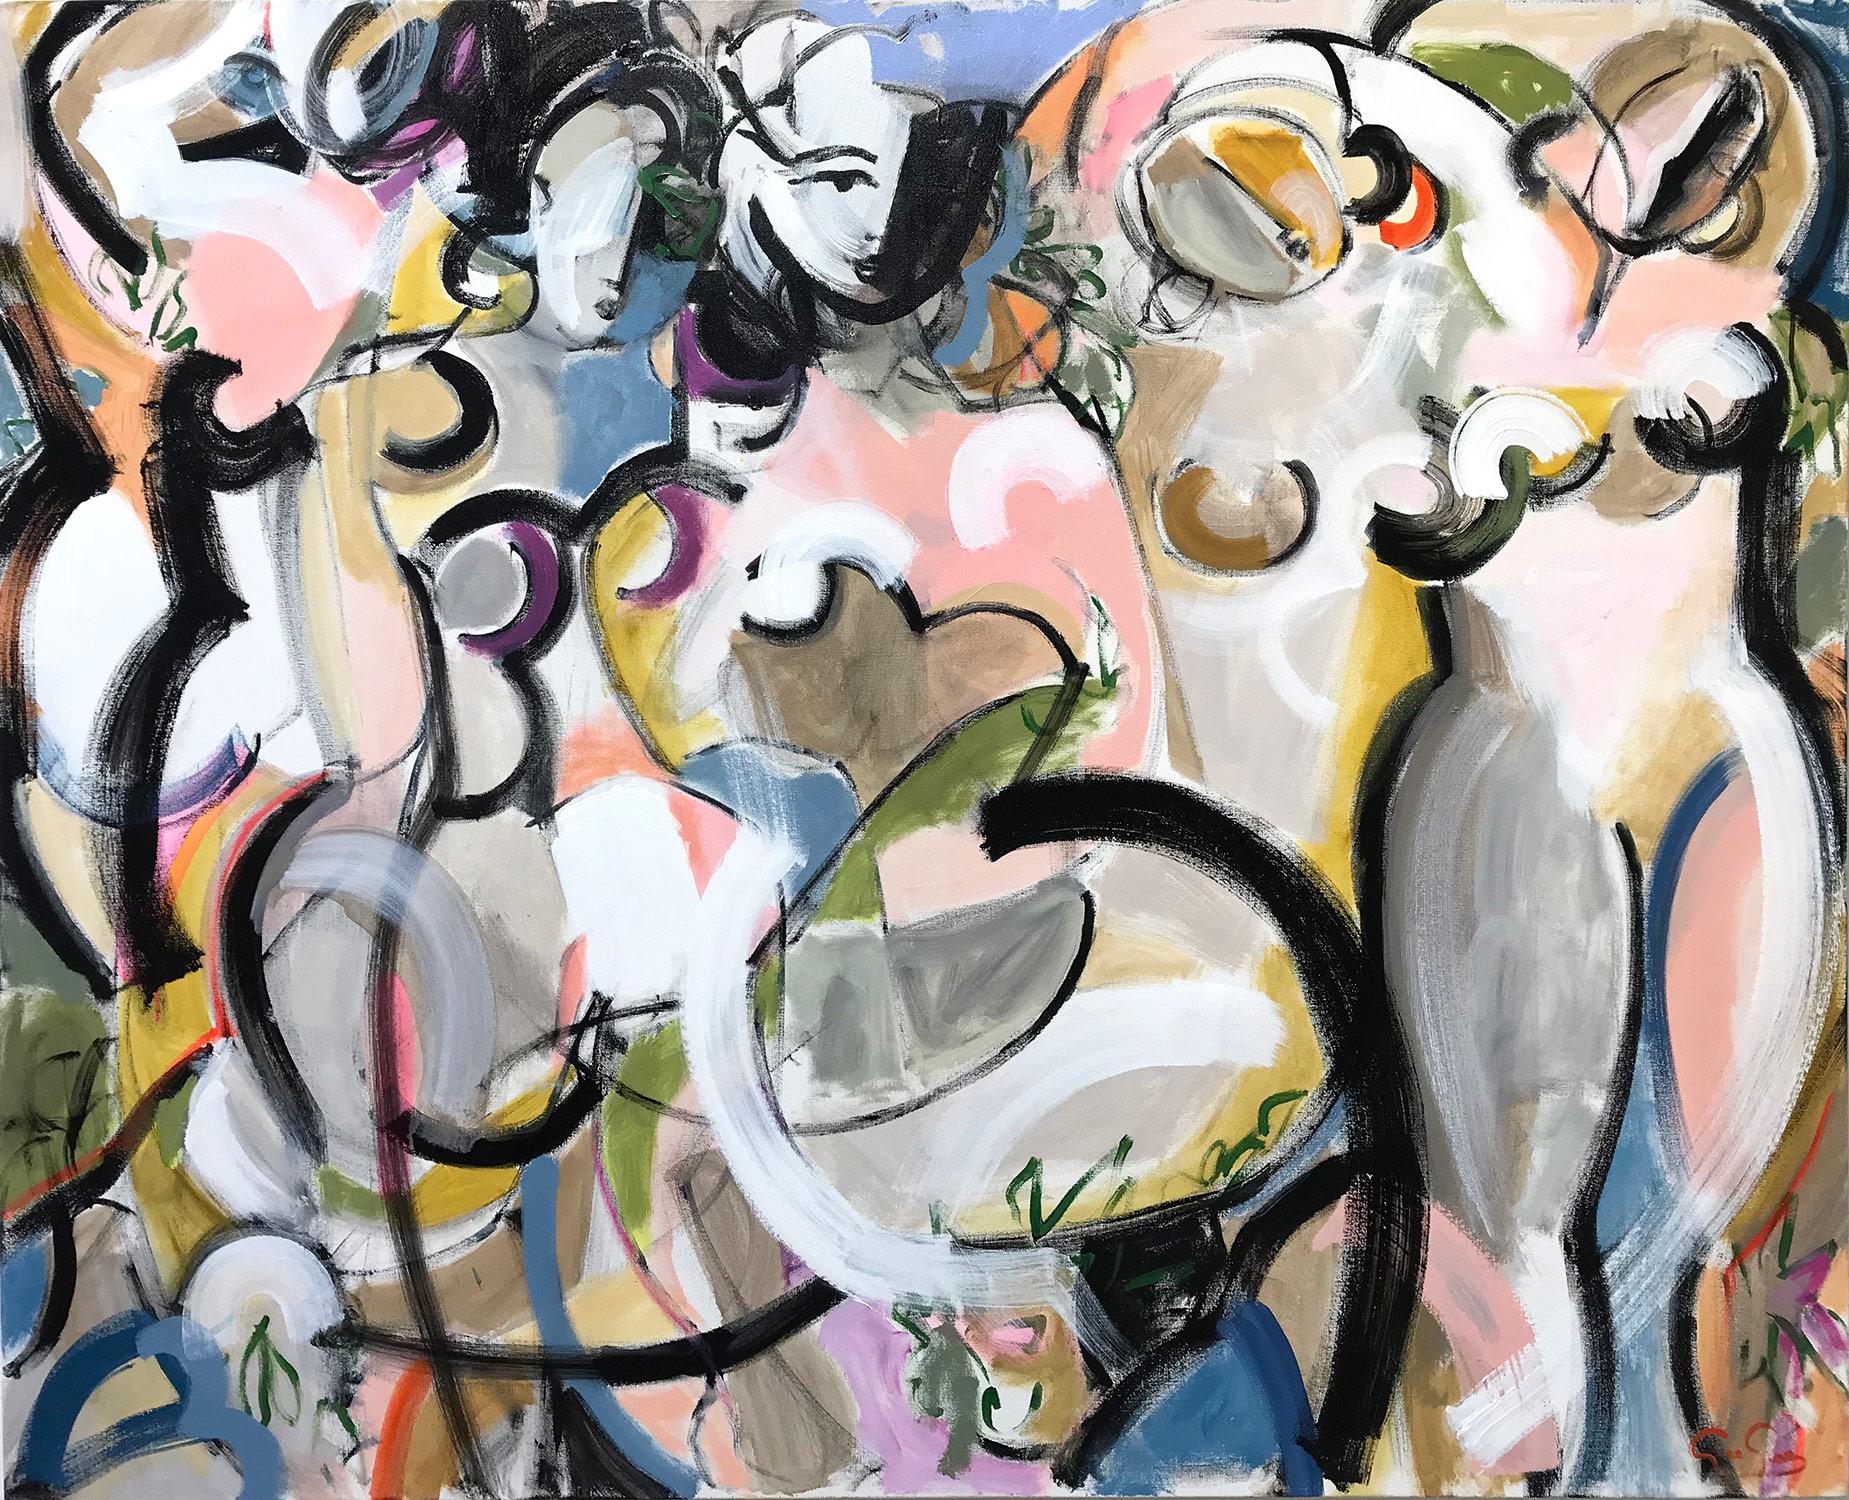 Gee Gee Collins Figurative Painting - "The Carnival of Venice" Modernist Abstract Nudes Painting on Canvas